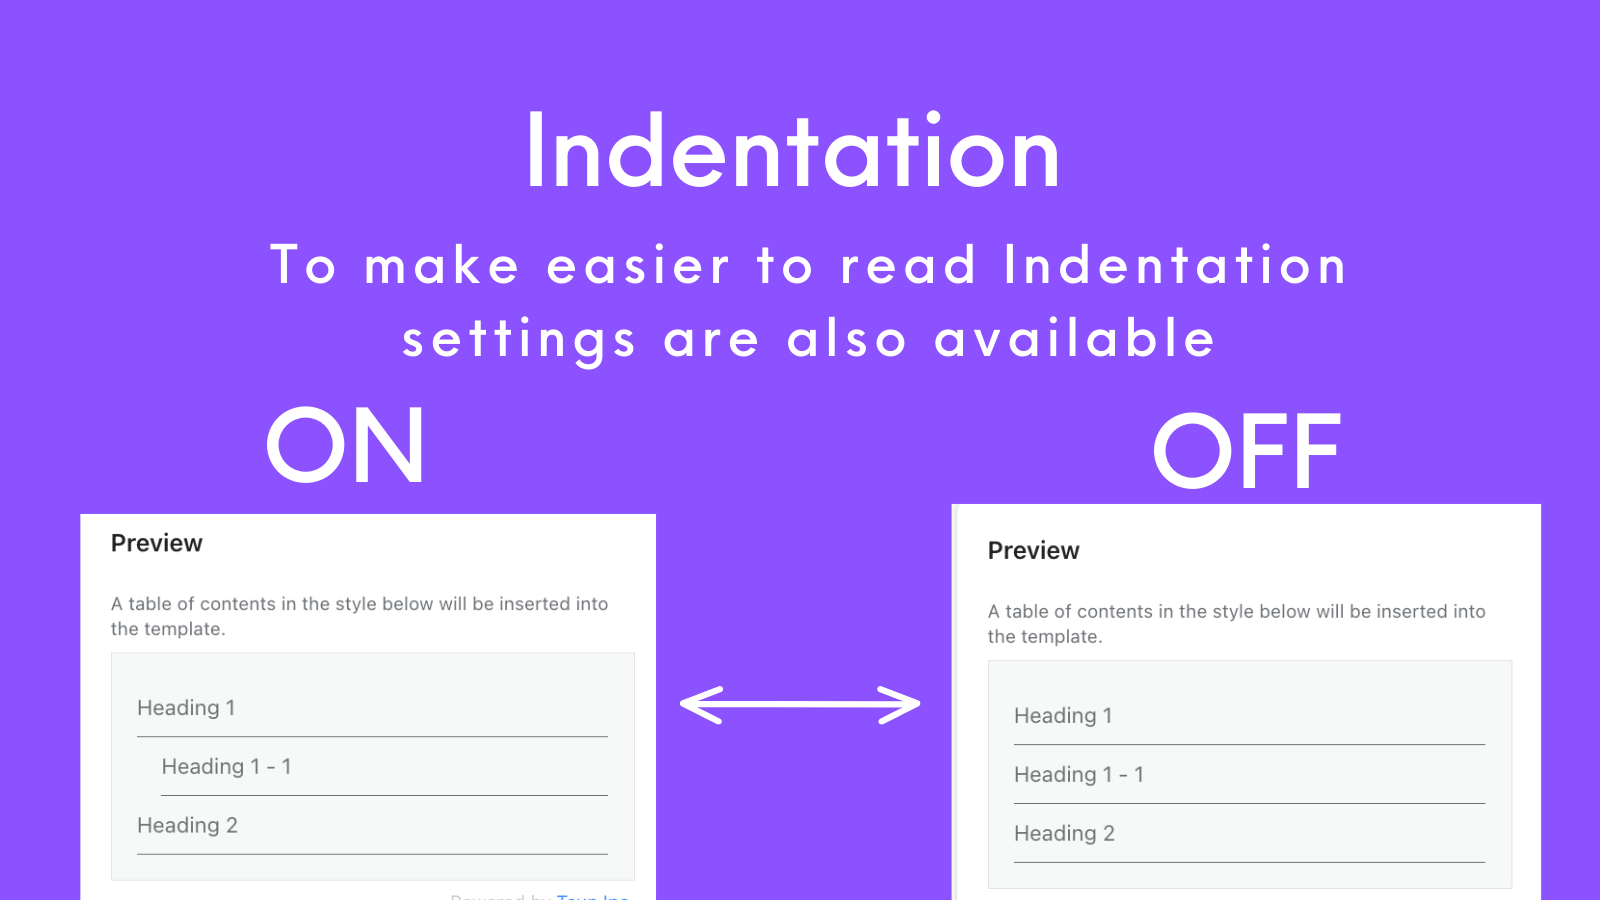 To make easier to read Indentation settings are also available